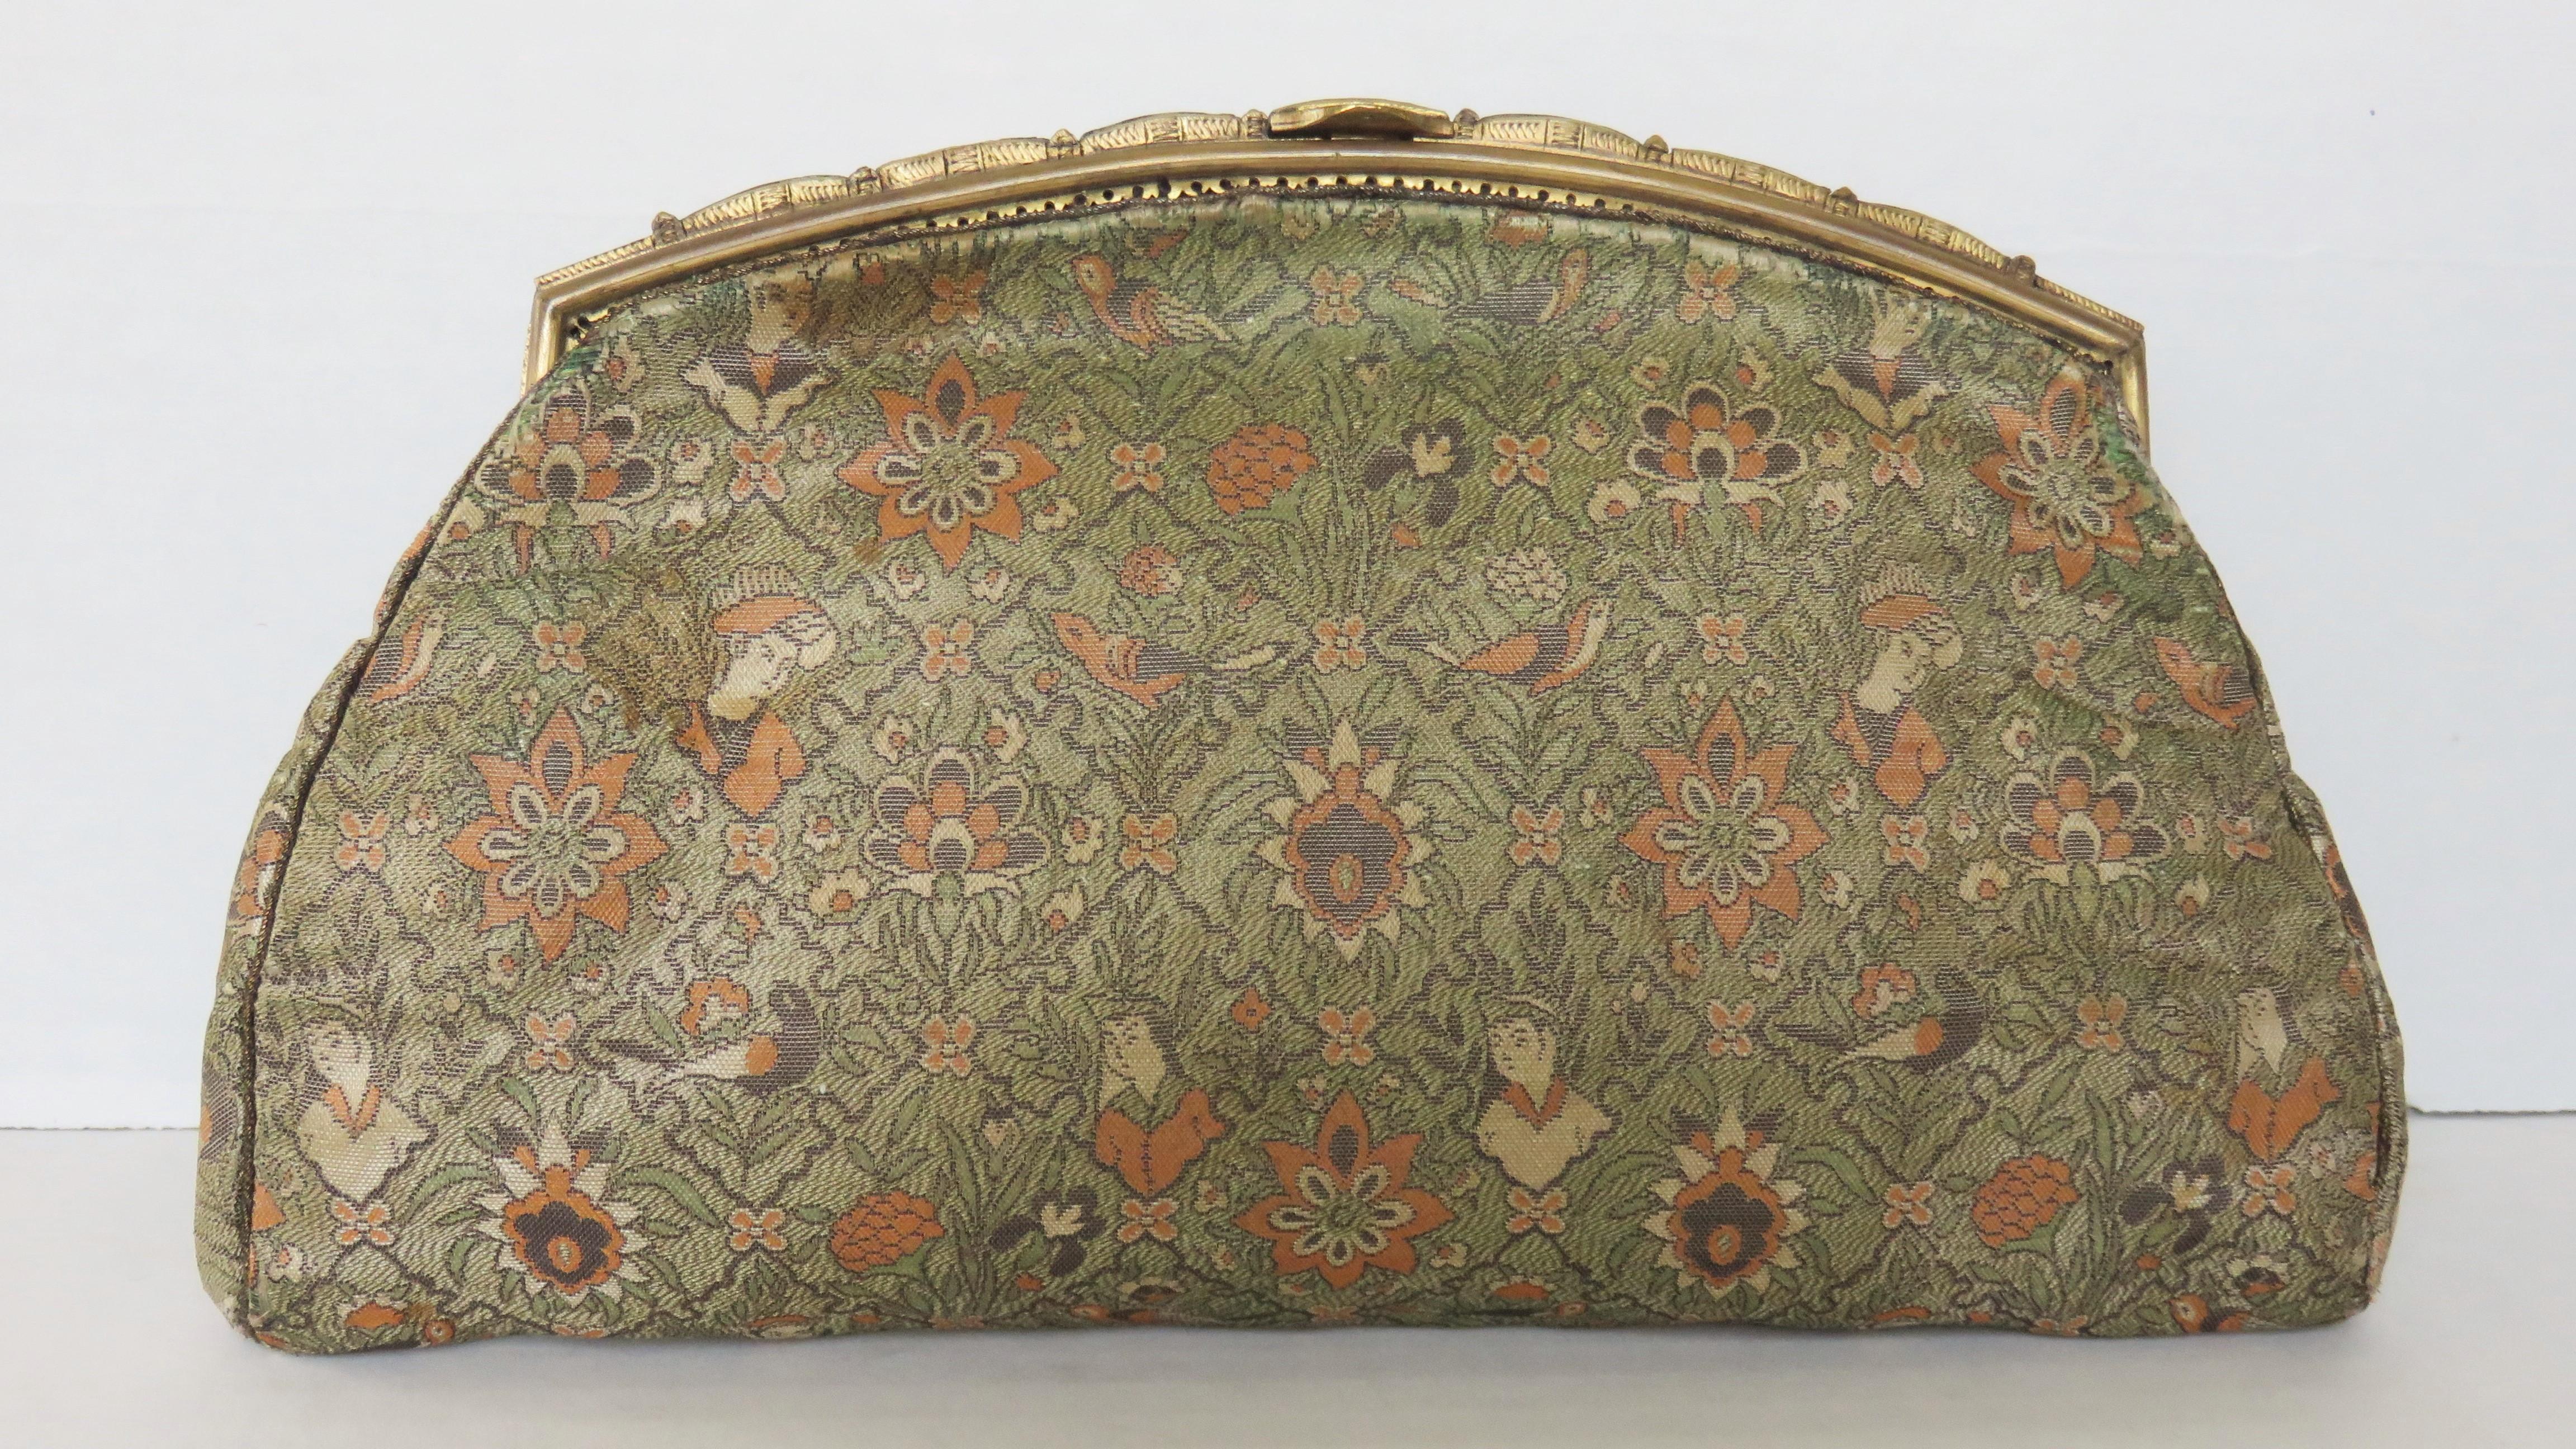 Asian Figure Motif Brocade Clutch with Painted Figures Tile Top 1930s In Good Condition For Sale In Water Mill, NY